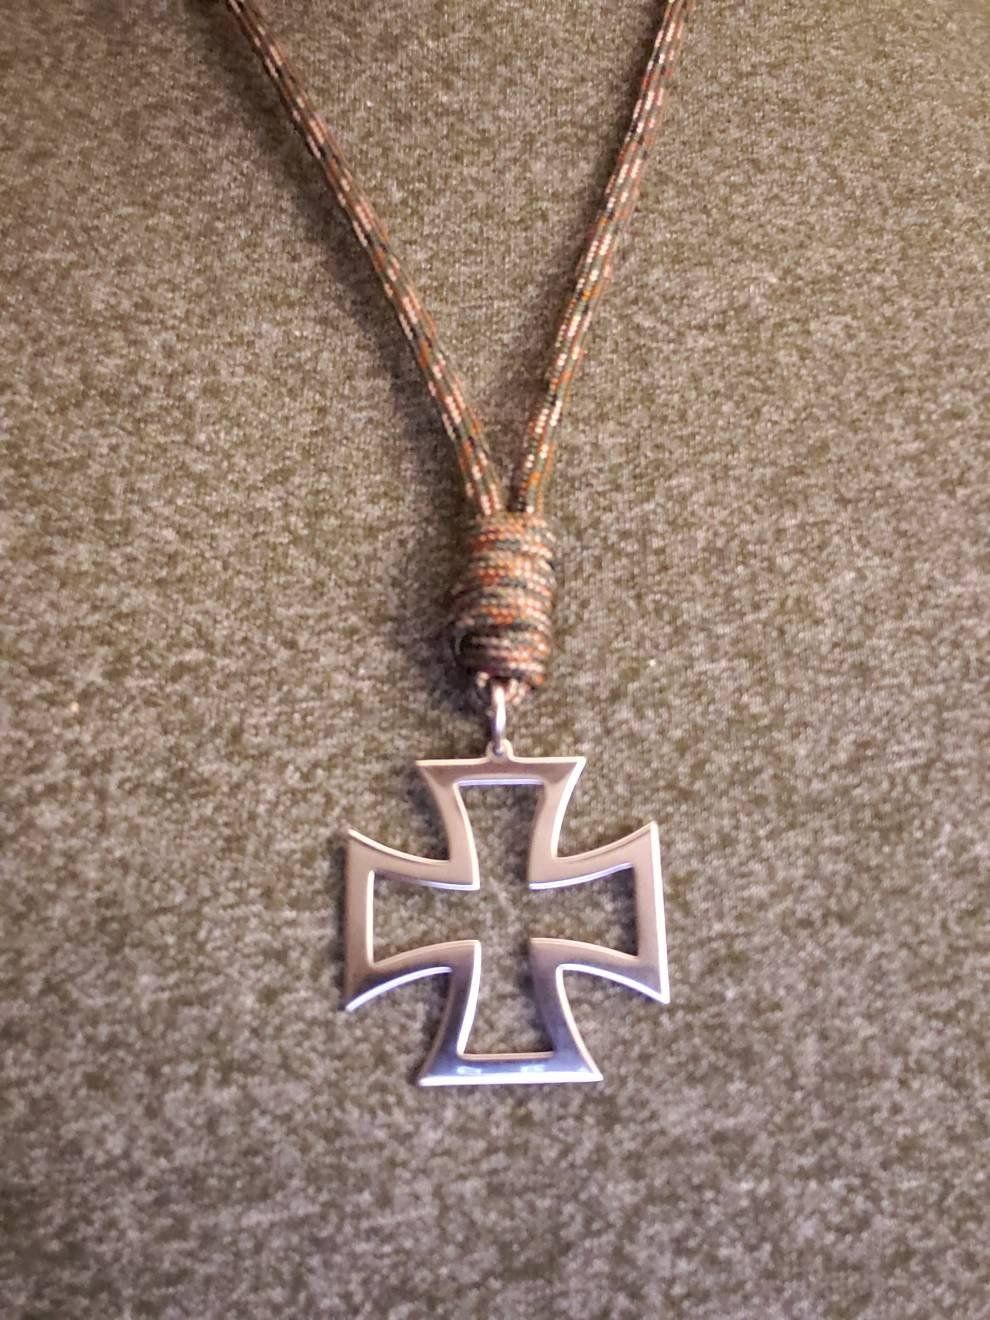 John review of Cross Pattee Symbol Necklace
